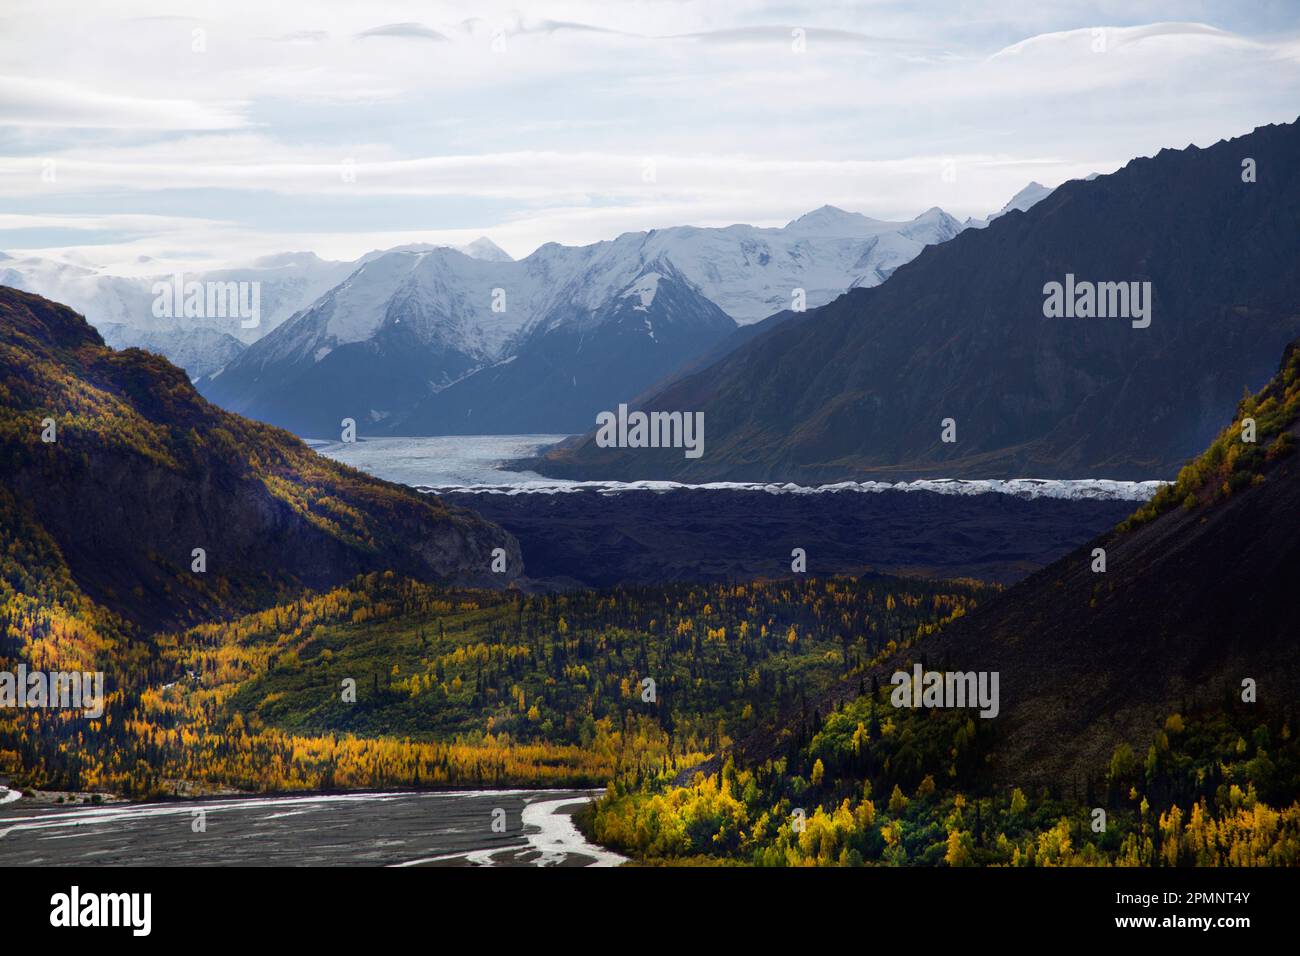 Autumn view of the Matanuska Glacier, a mountain glacier in Alaska that is formed in a valley 27 miles long and from there, it flows into the Matan... Stock Photo